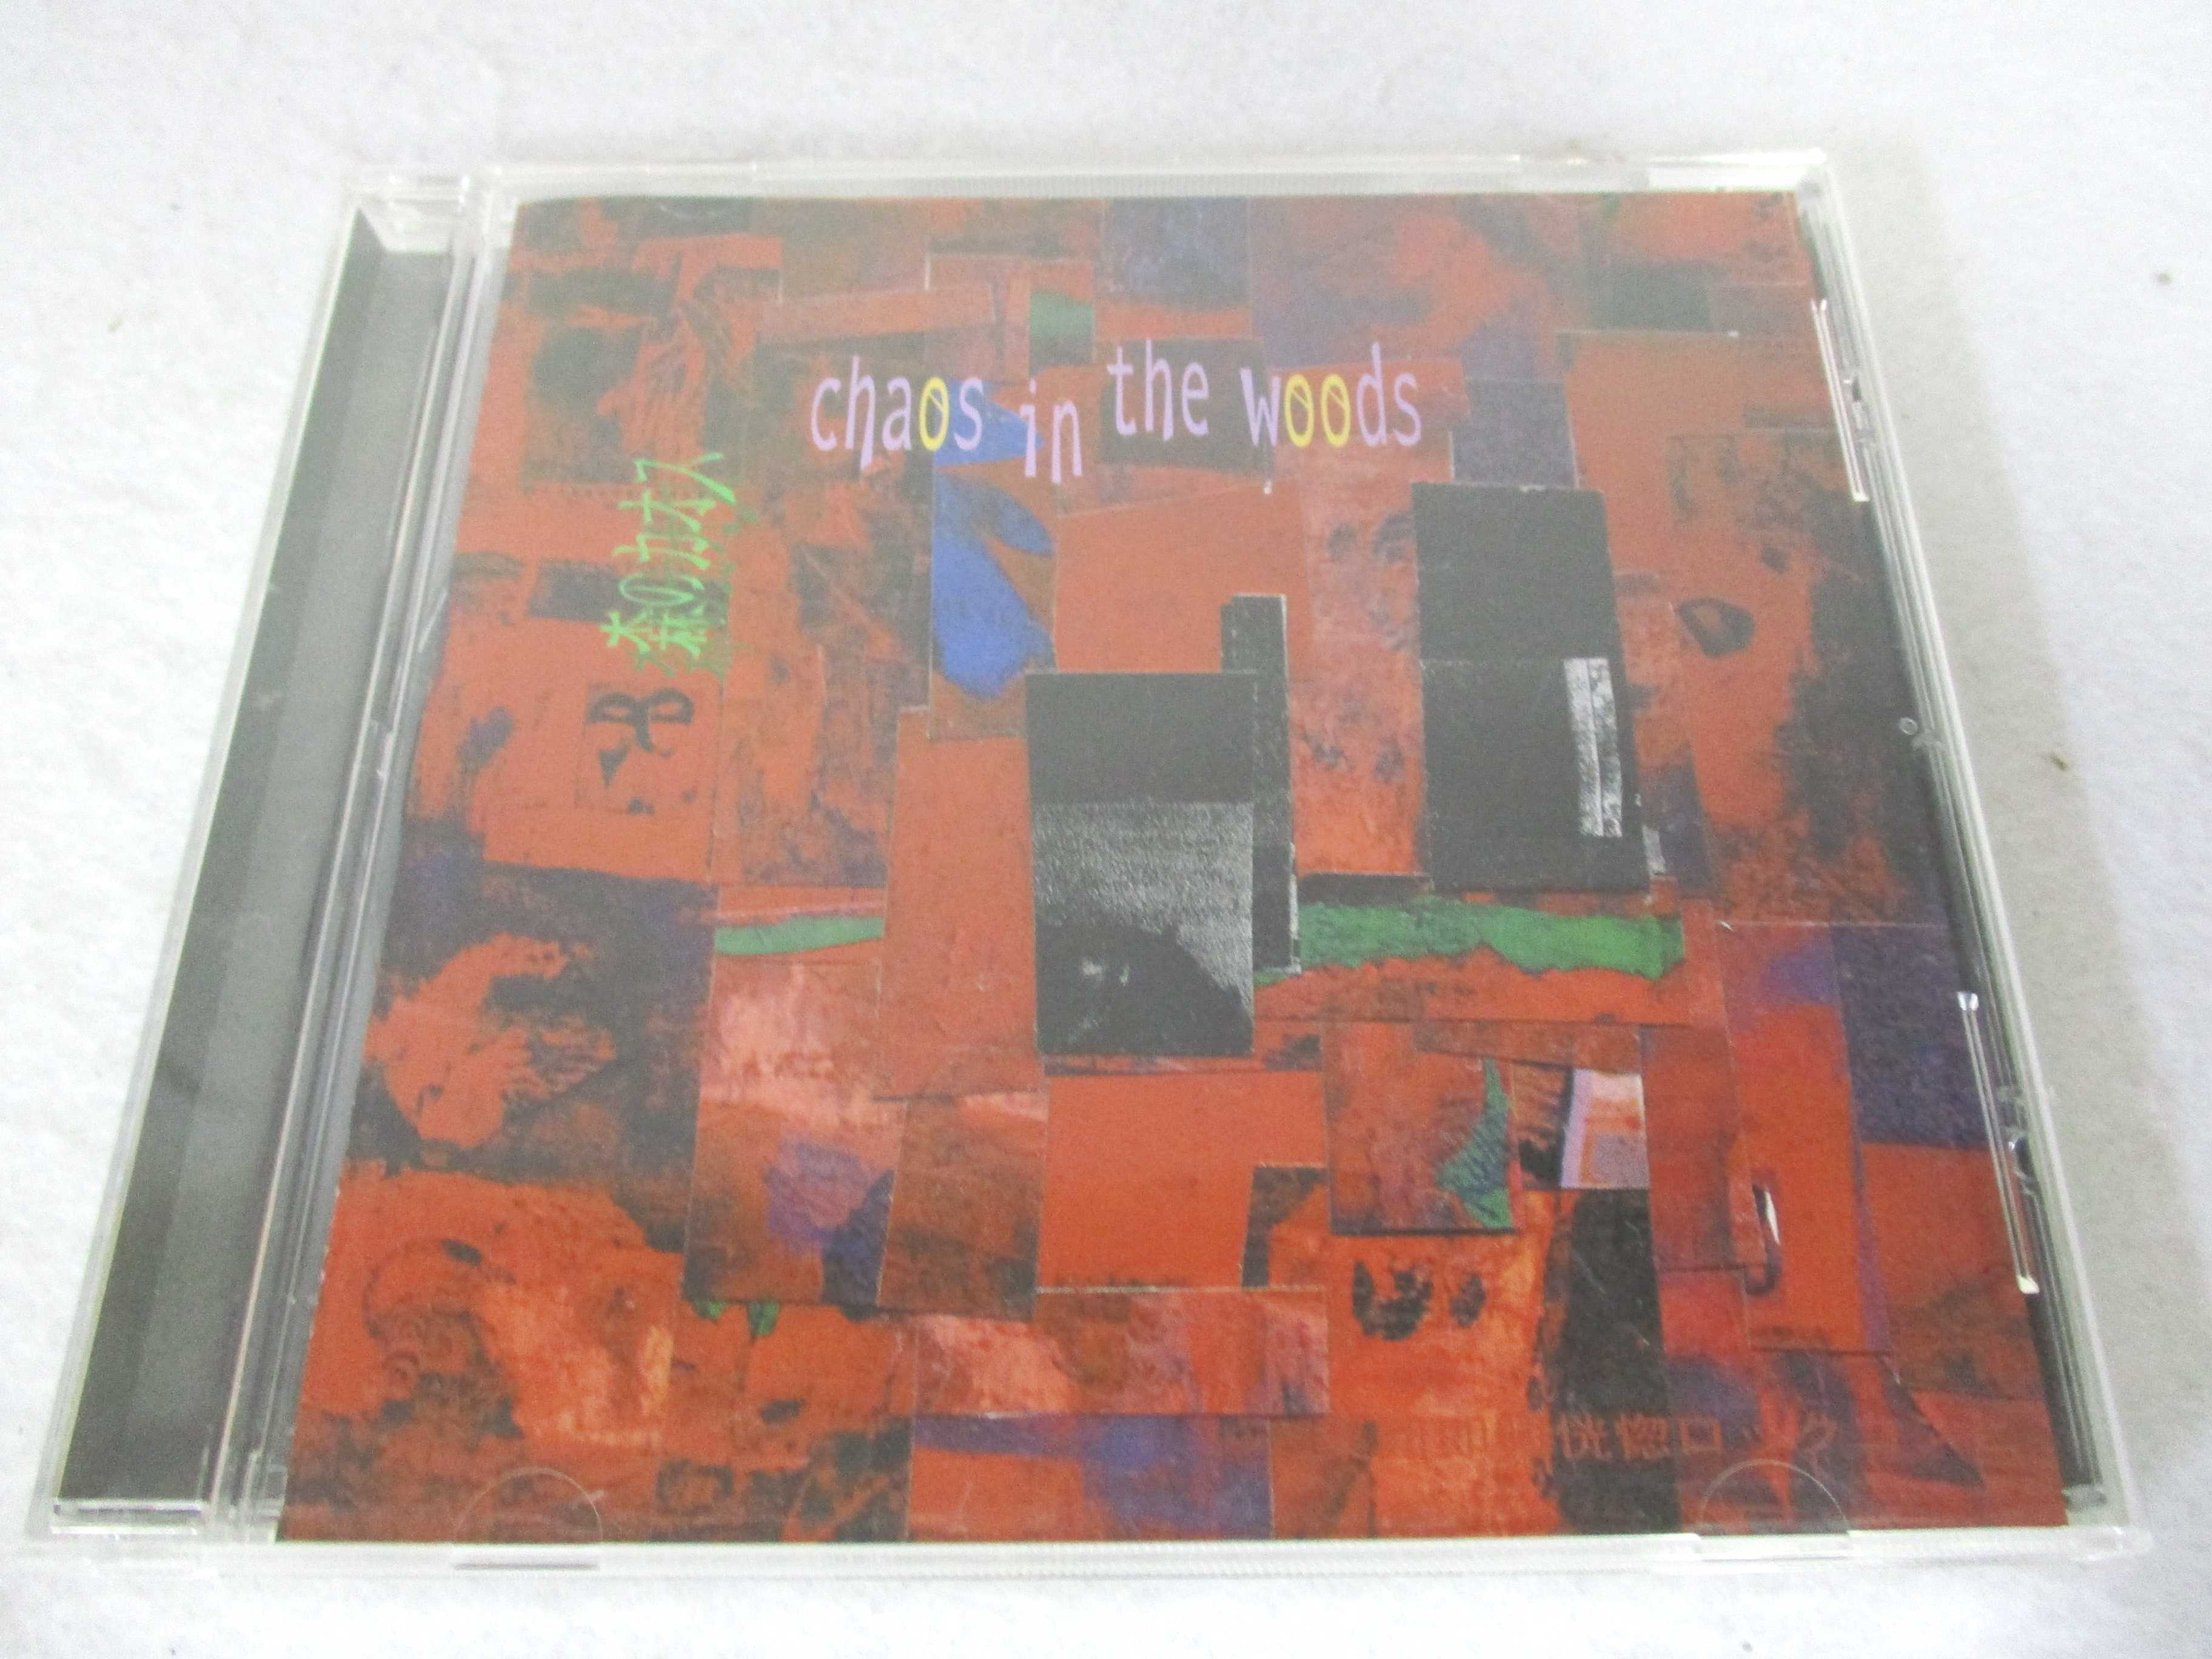 AC02571 【中古】 【CD】 森のカオス~chaos in the woods~/Various Artists